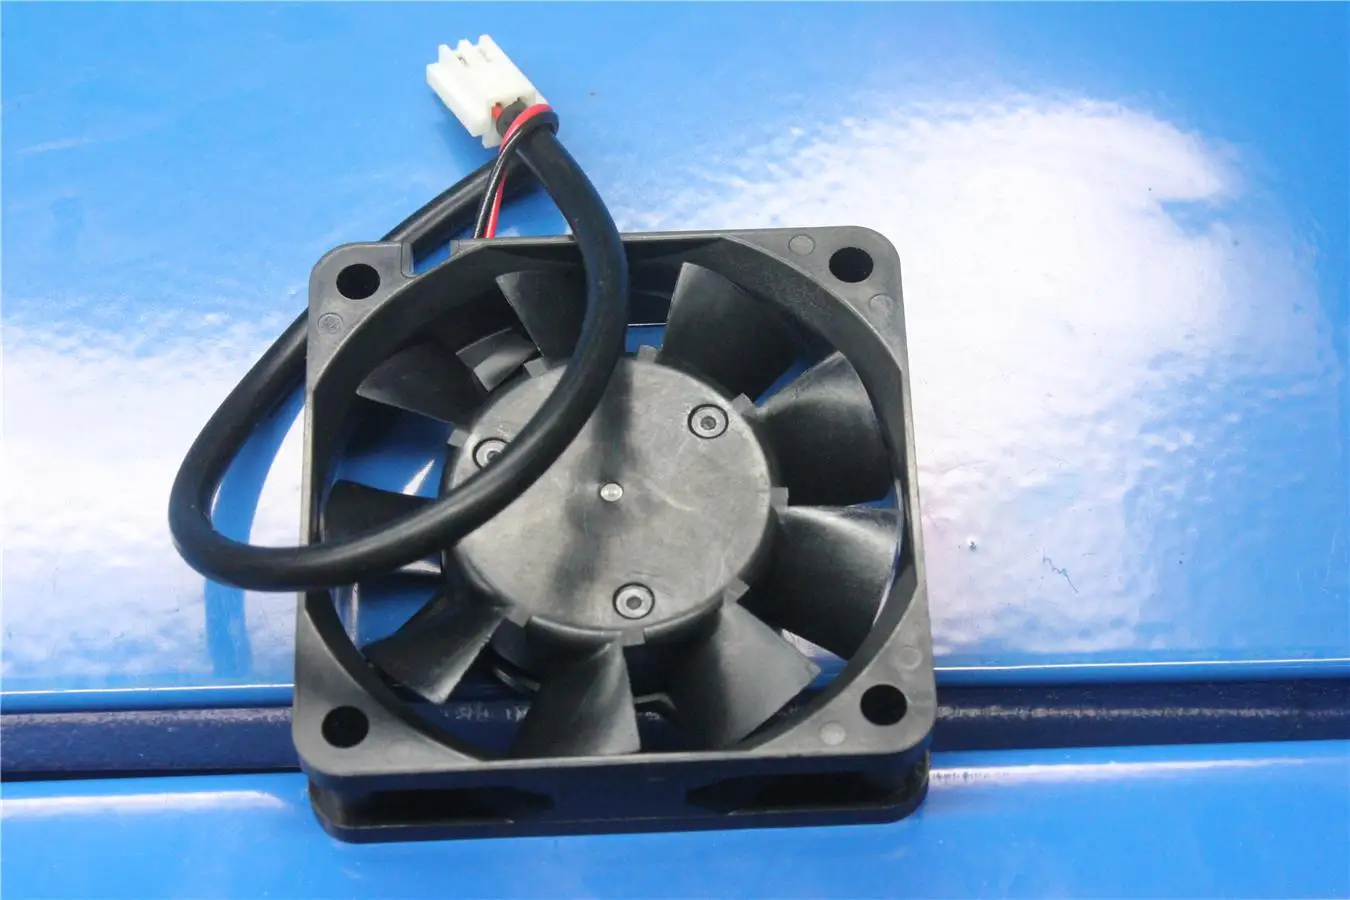 

2406kl-05w-b30 genuine new DC24V 0.08A 60 * 60 * 15mm variable frequency cooling fan